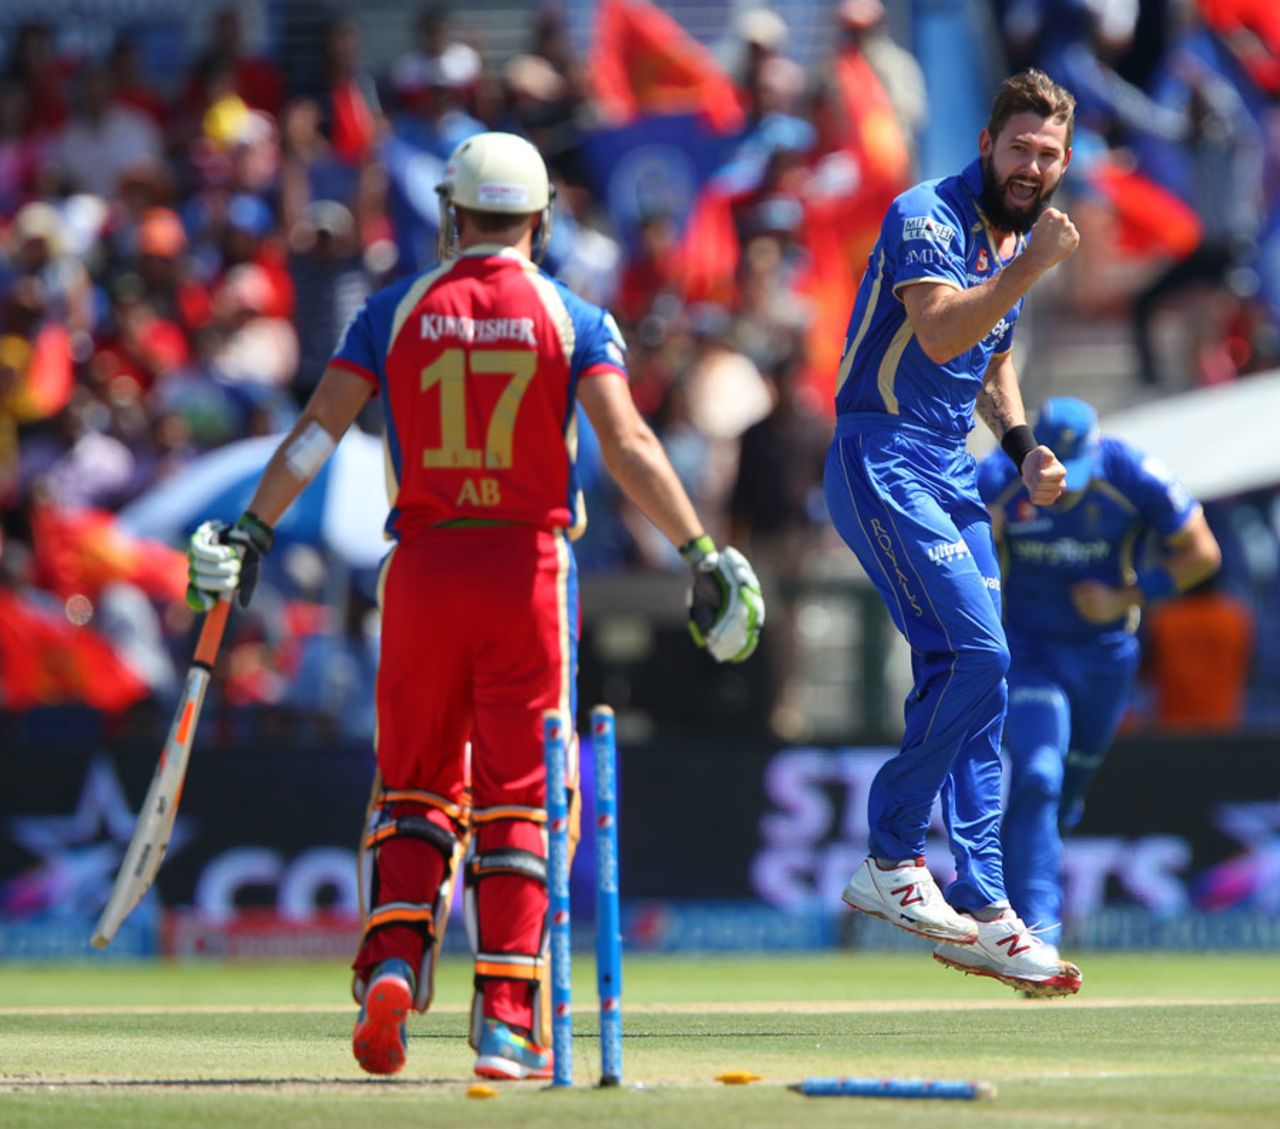 Kane Richardson picked up two wickets from his first two deliveries, Royals v Royal Challengers, IPL 2014, Abu Dhabi, April 26, 2014